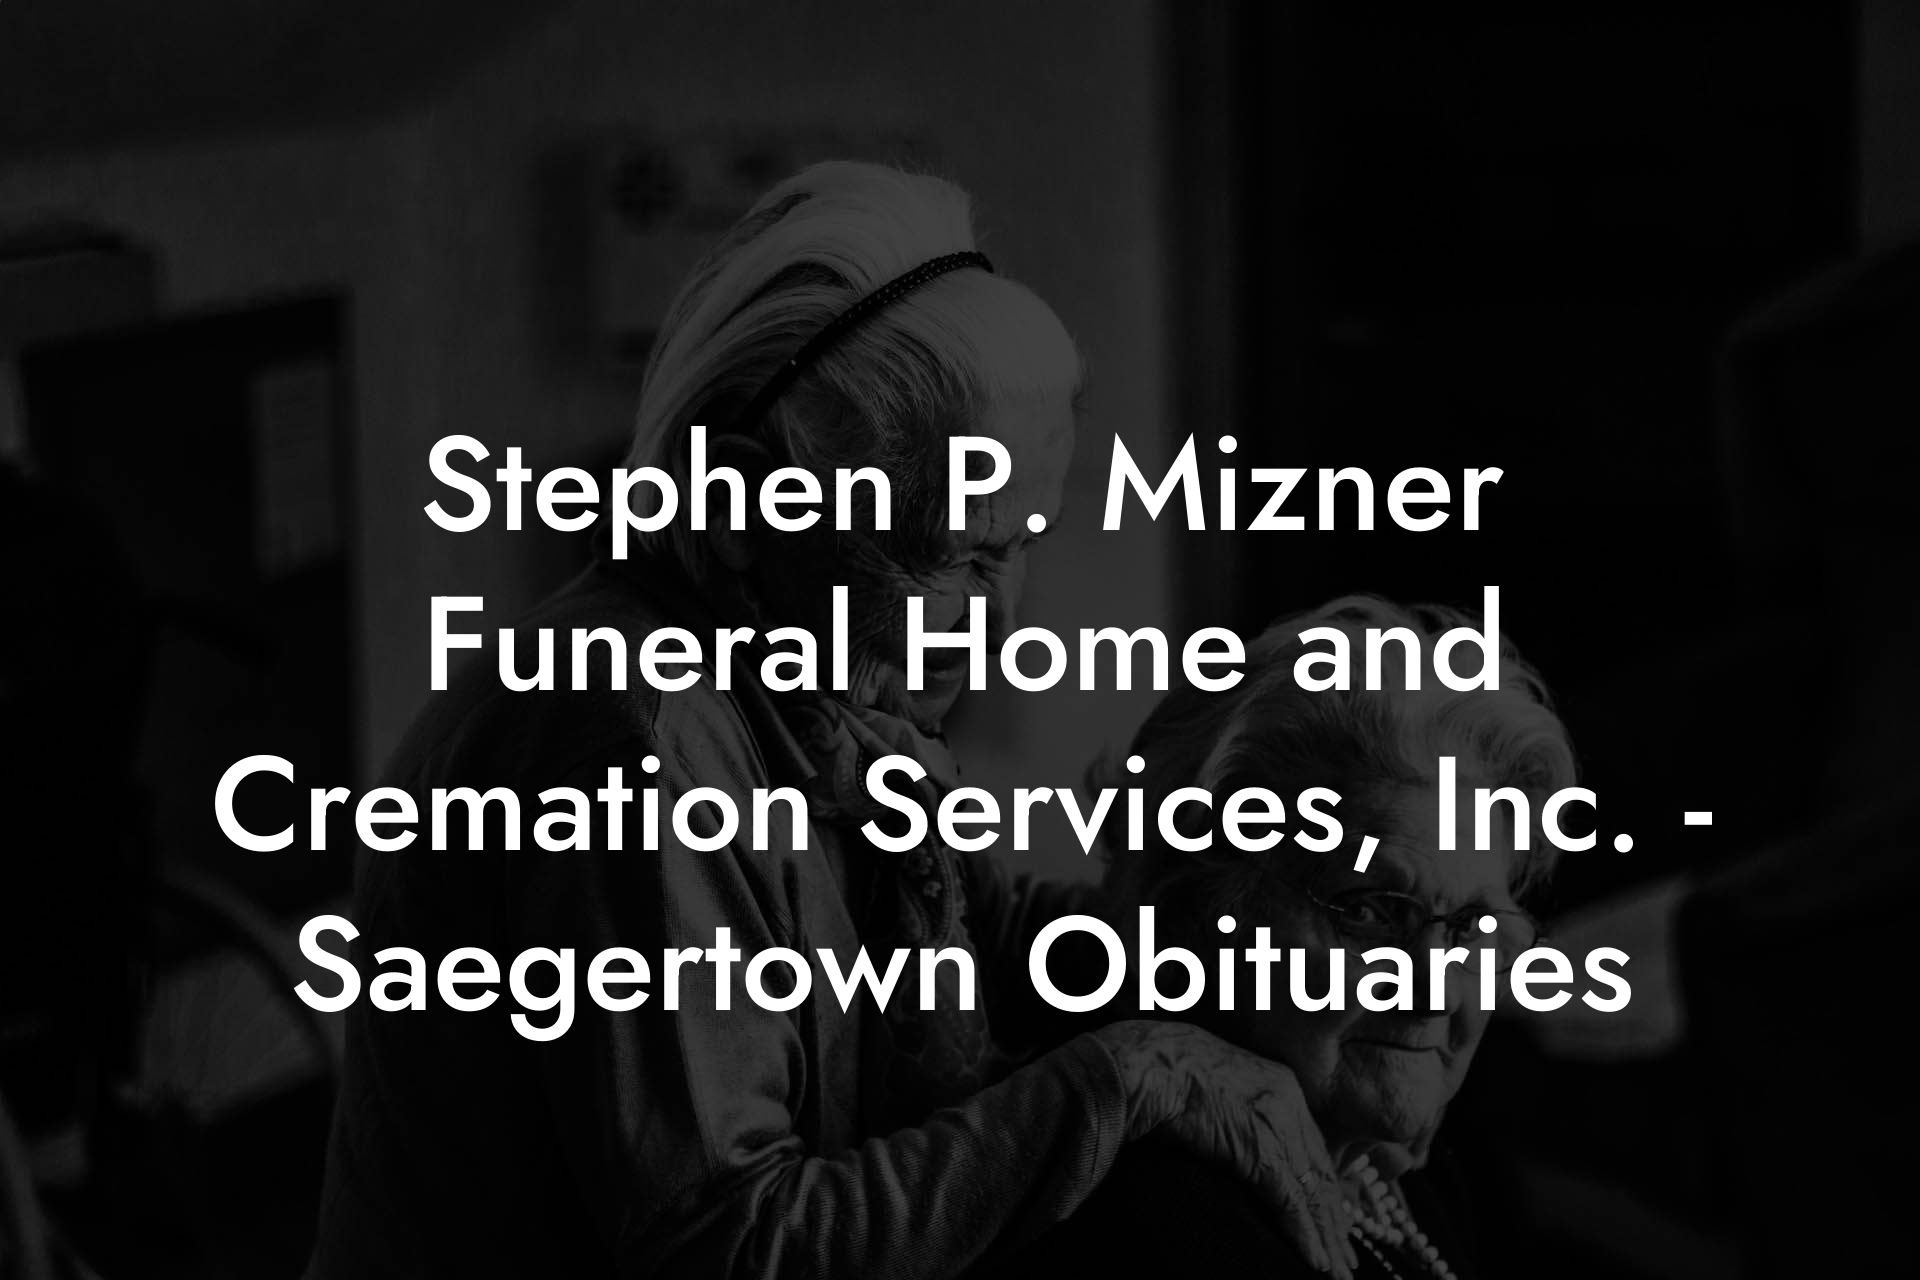 Stephen P. Mizner Funeral Home and Cremation Services, Inc. - Saegertown Obituaries